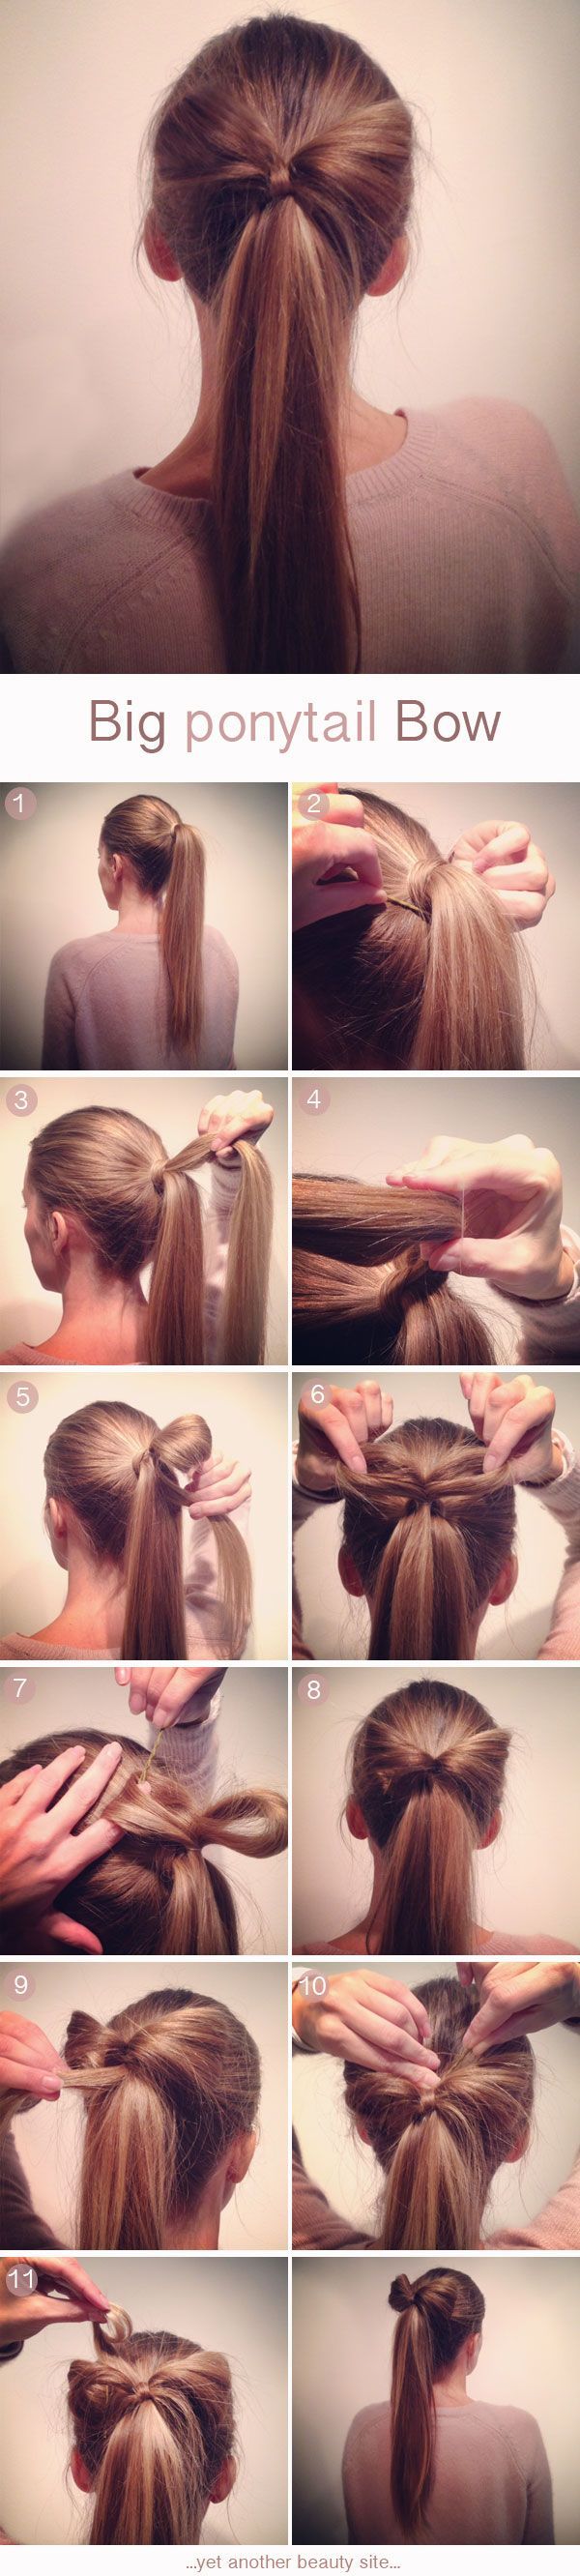 Yet another beauty site #hairtutorials #ponytail #hairbow #bow